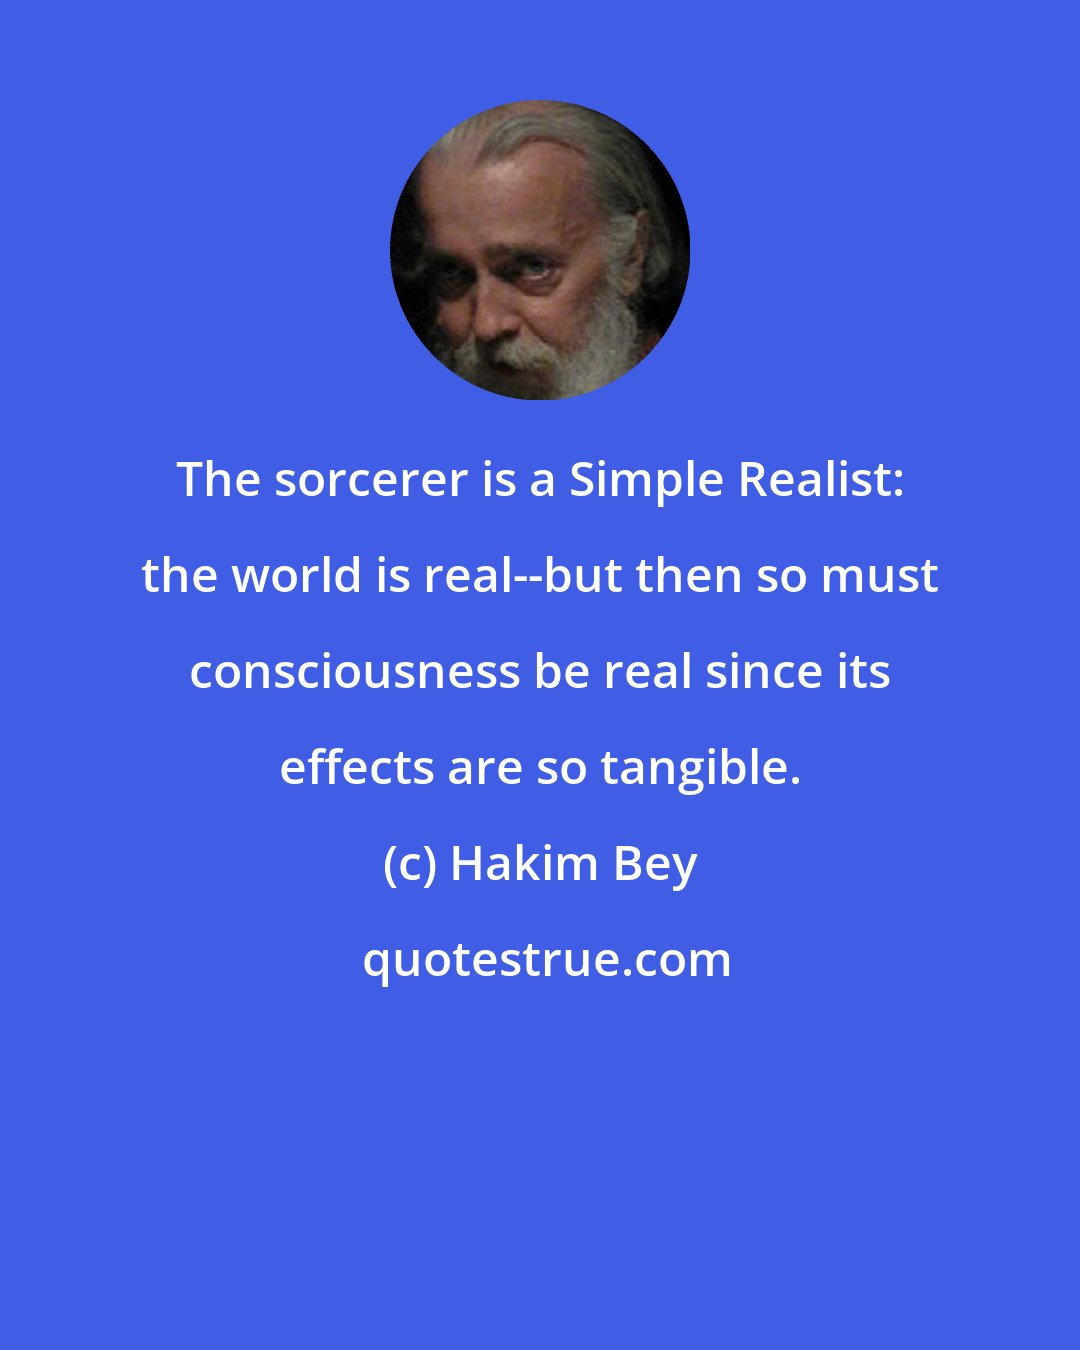 Hakim Bey: The sorcerer is a Simple Realist: the world is real--but then so must consciousness be real since its effects are so tangible.